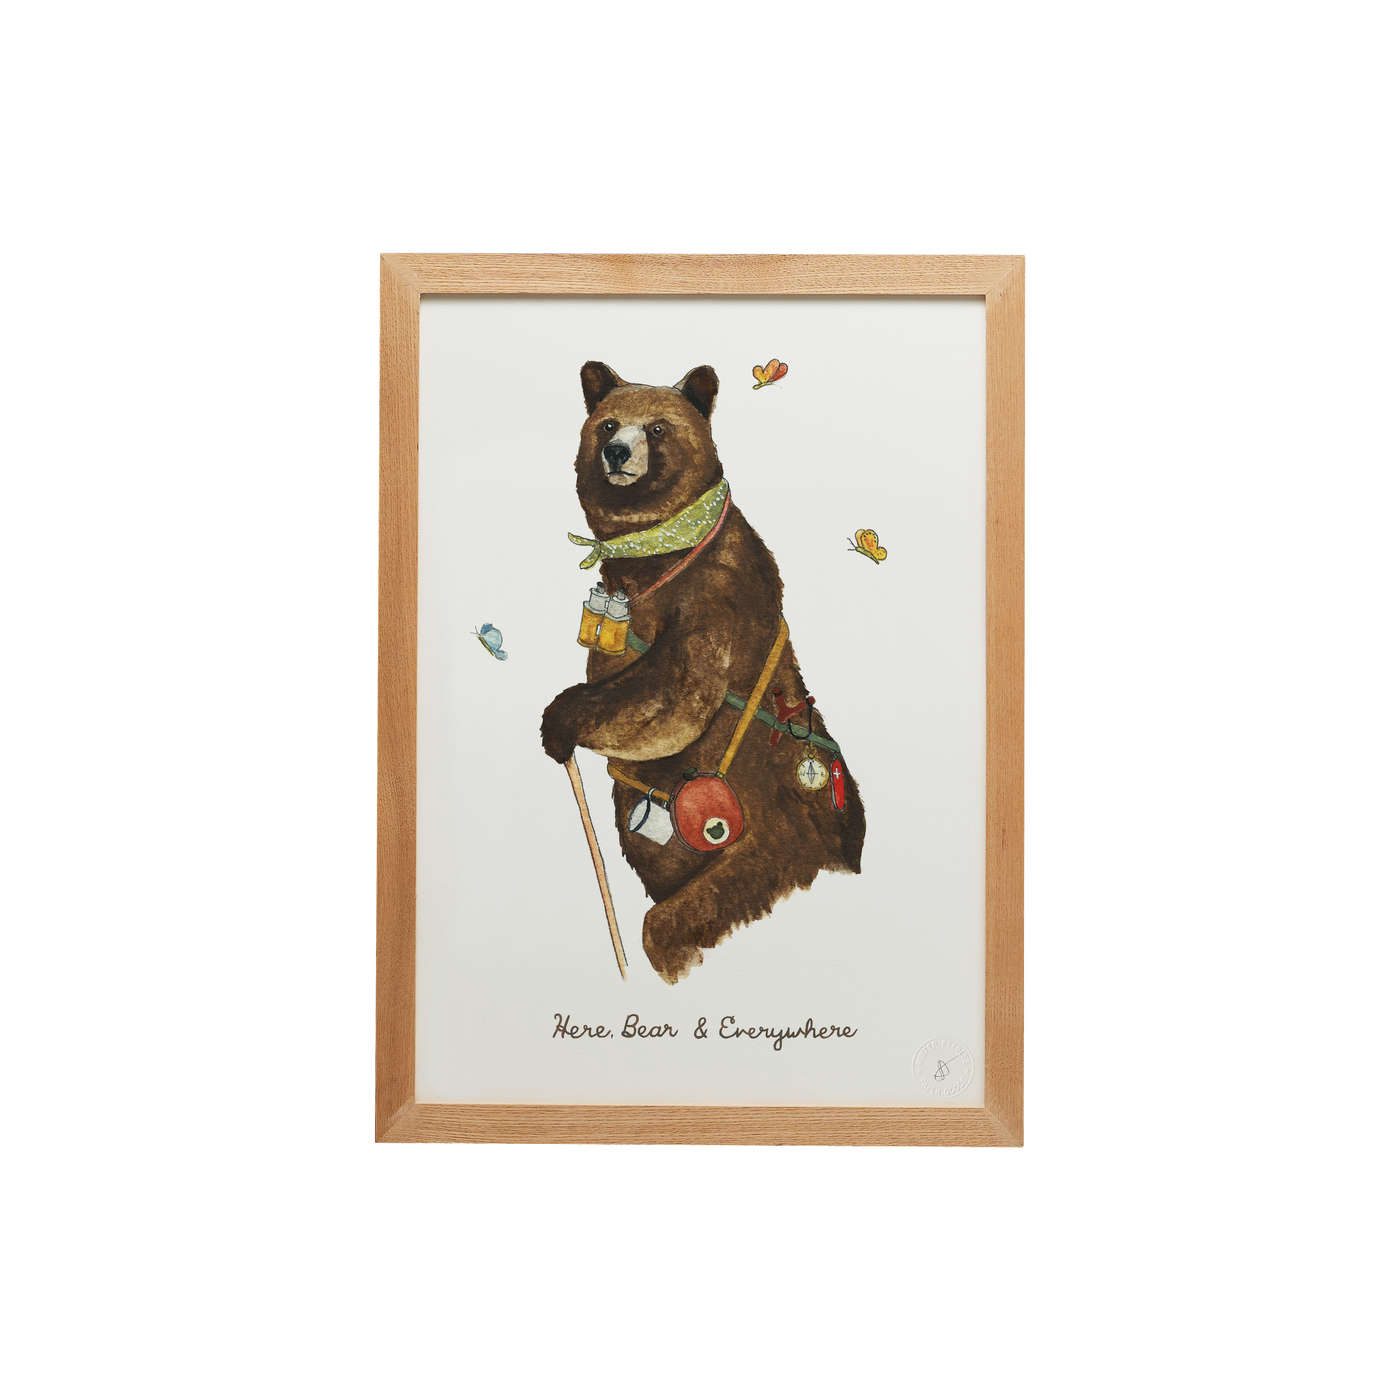 Print of a bear on white background